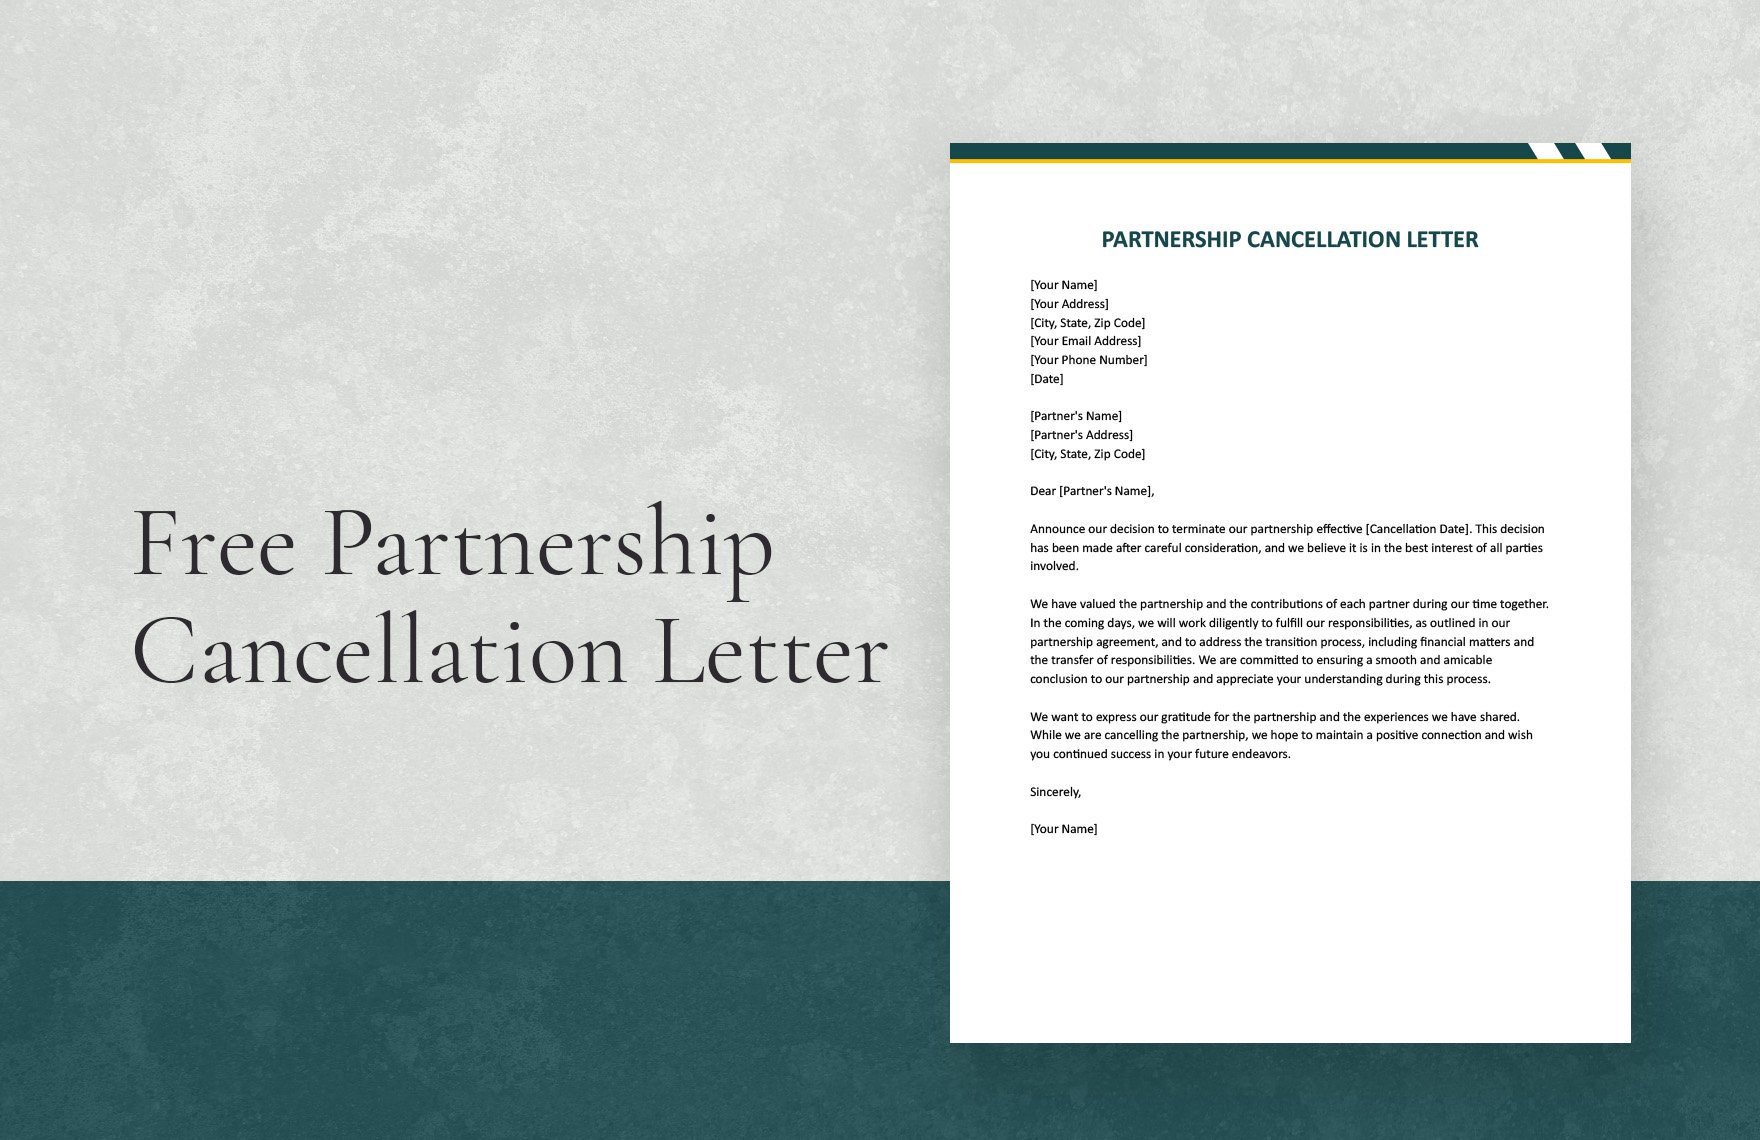 Free Partnership Cancellation Letter in Word, Google Docs